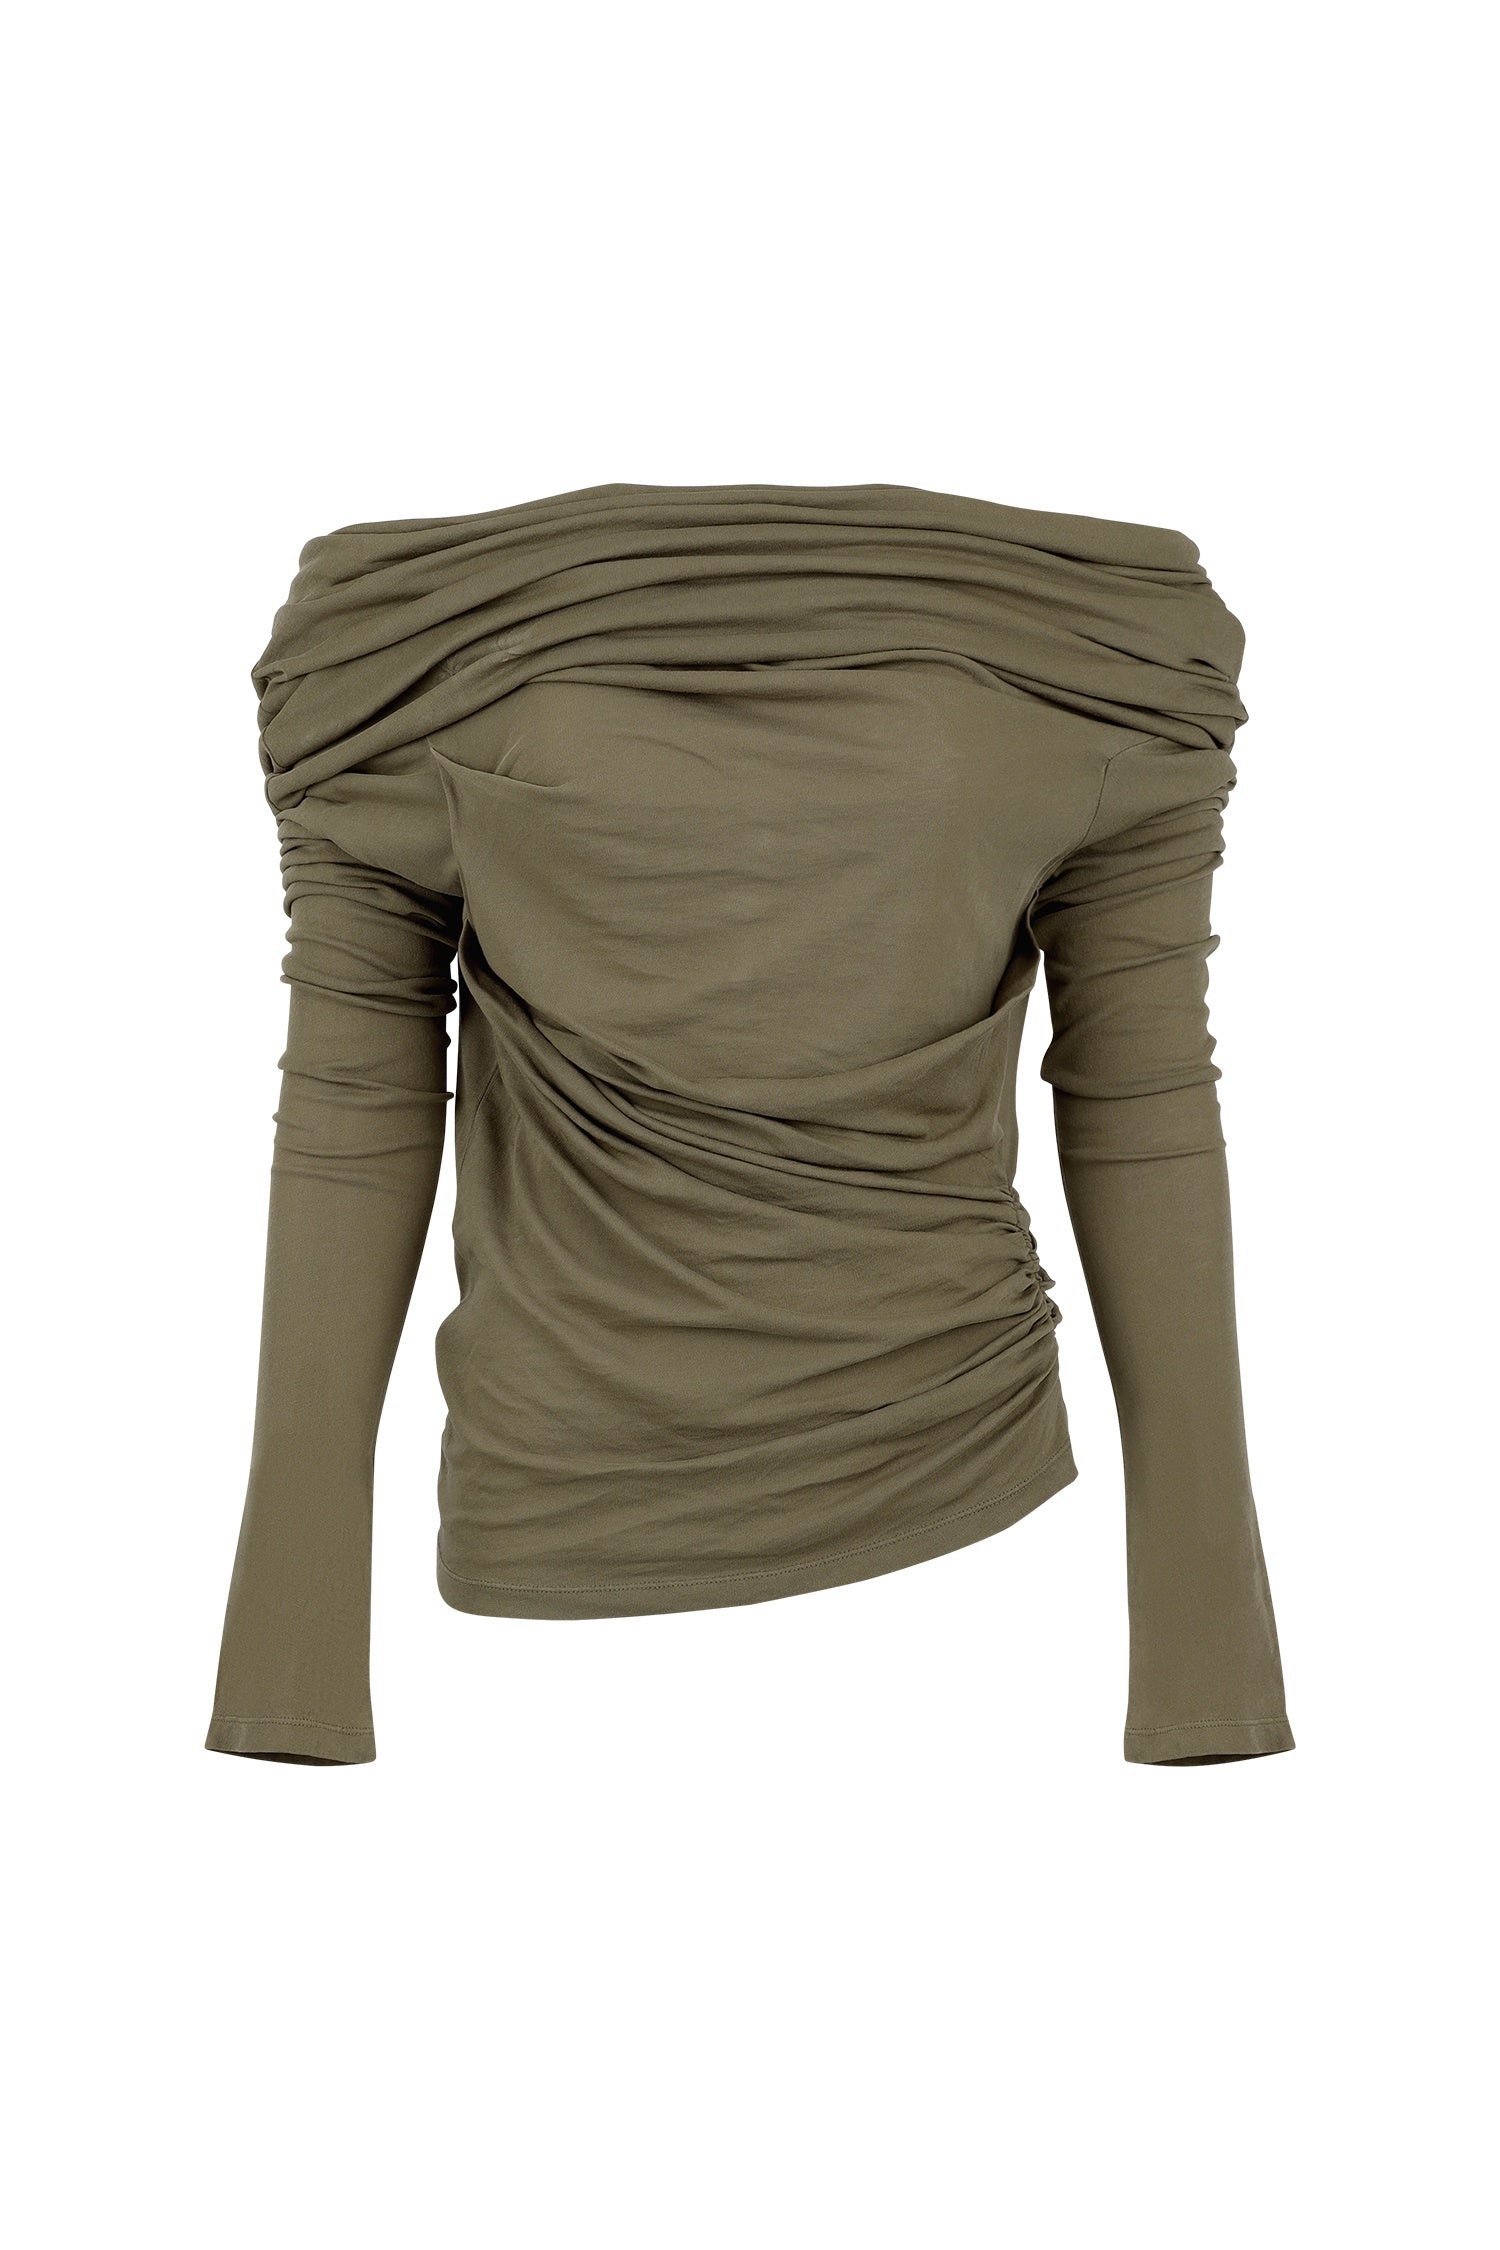 BOUND TOP IN SAND, DROP 6